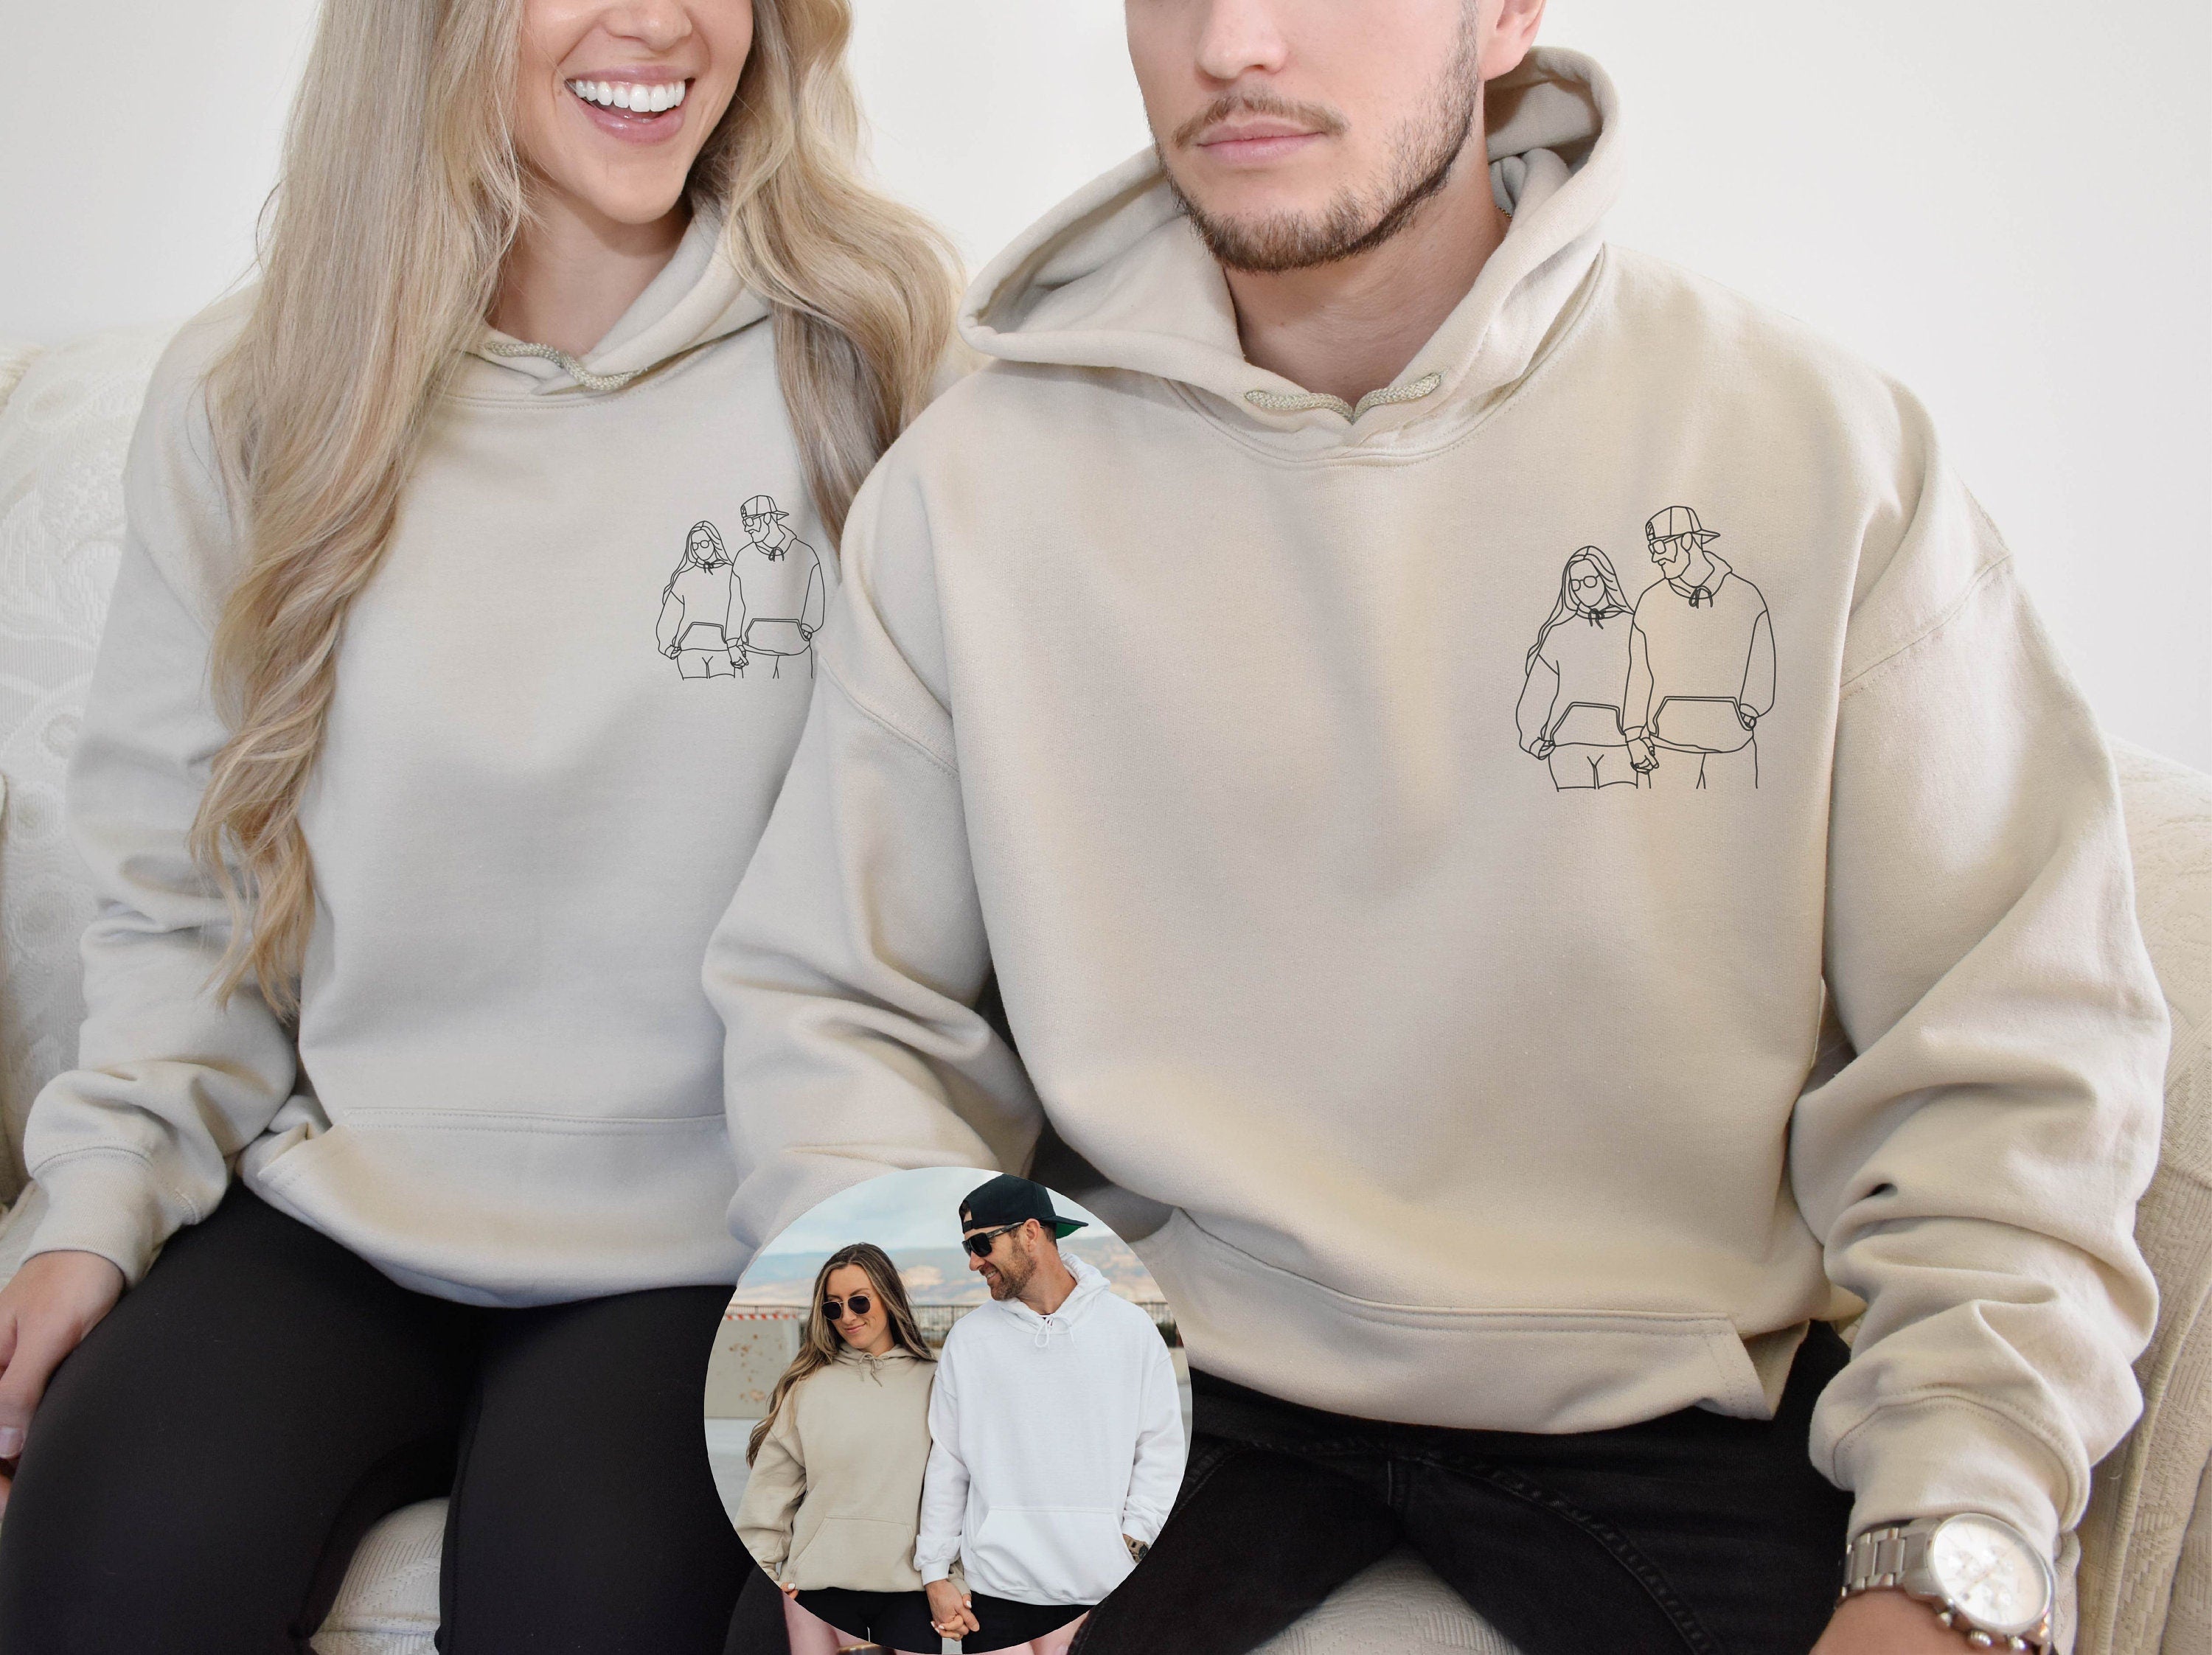 Custom Couple Portrait from Photo Sweatshirt Personalized Gifts for Couples